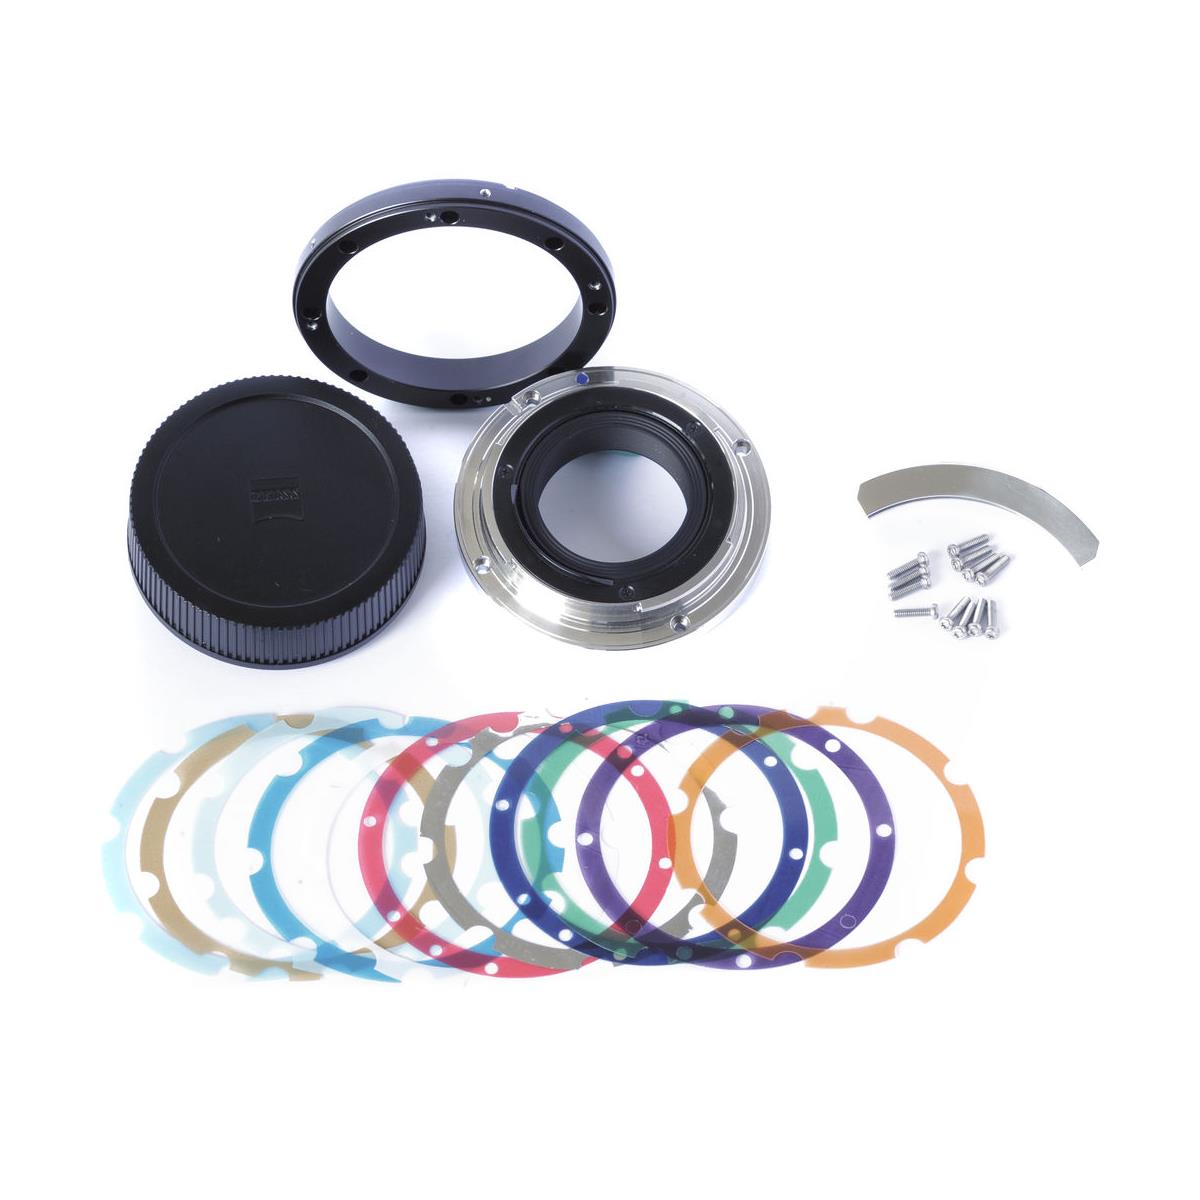 Image of Zeiss Interchangeable Mount Set (IMS) for 18mm CP.3 MFT Mount Lens